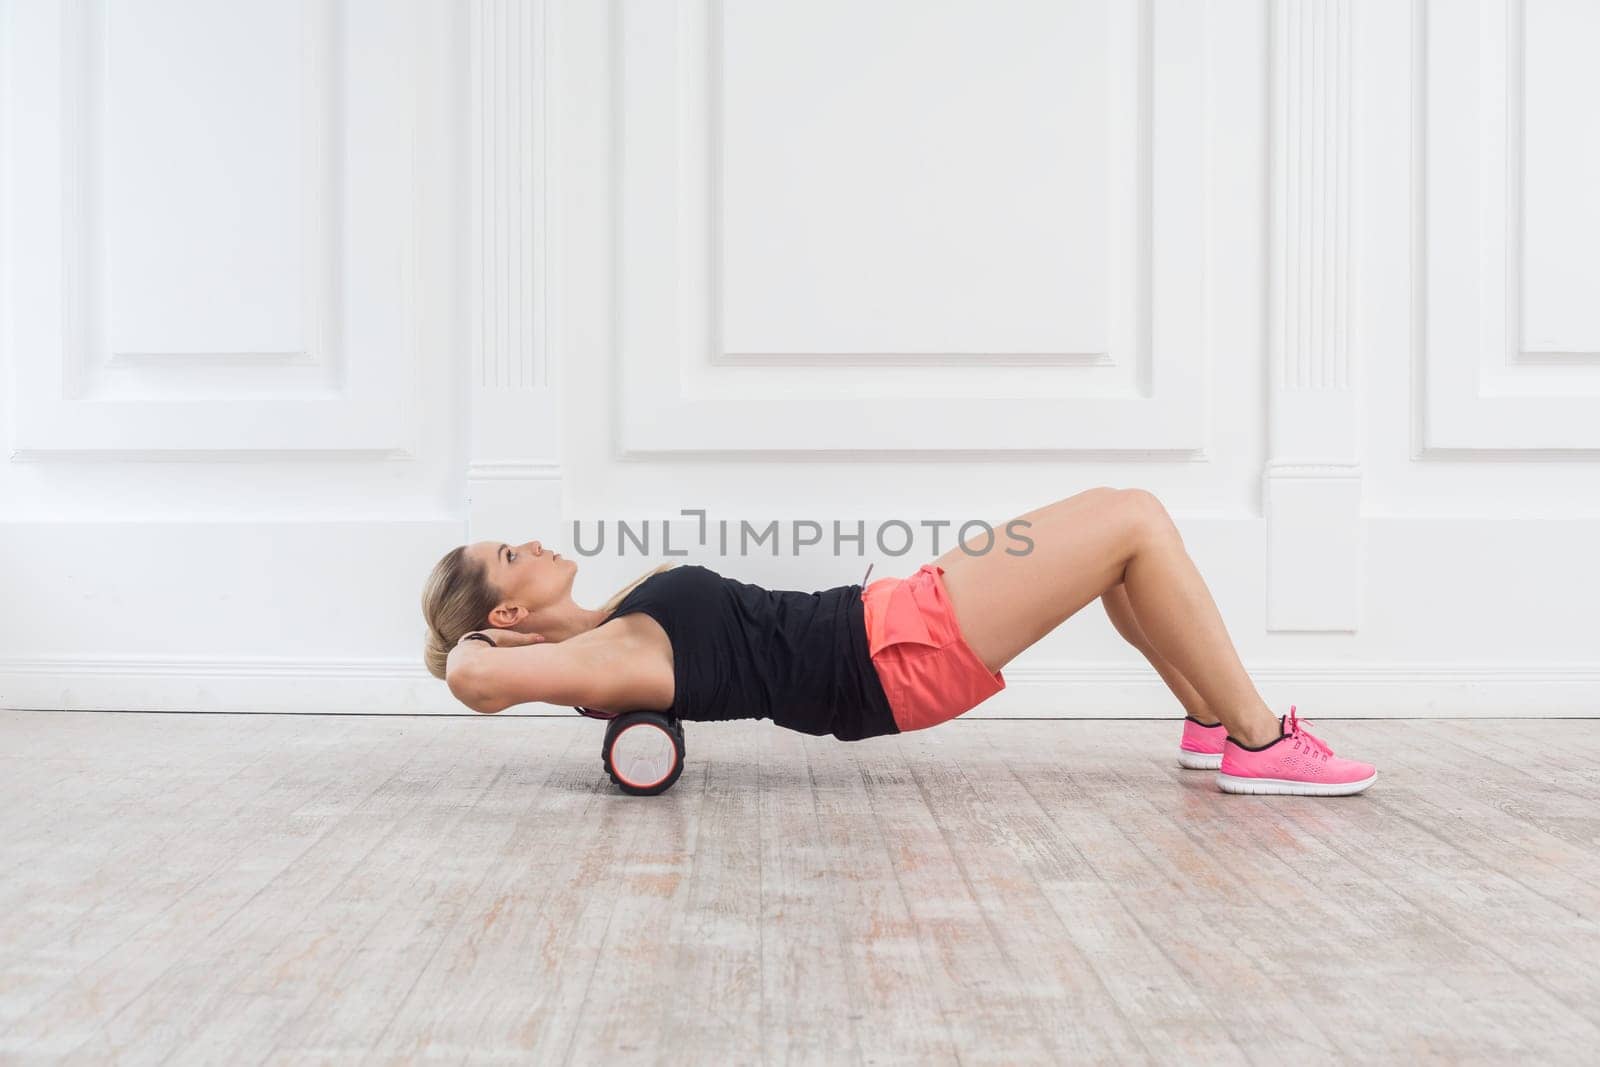 Slim woman using foam roller in gym to workout to remove the pain, stretching and massaging muscles. by Khosro1